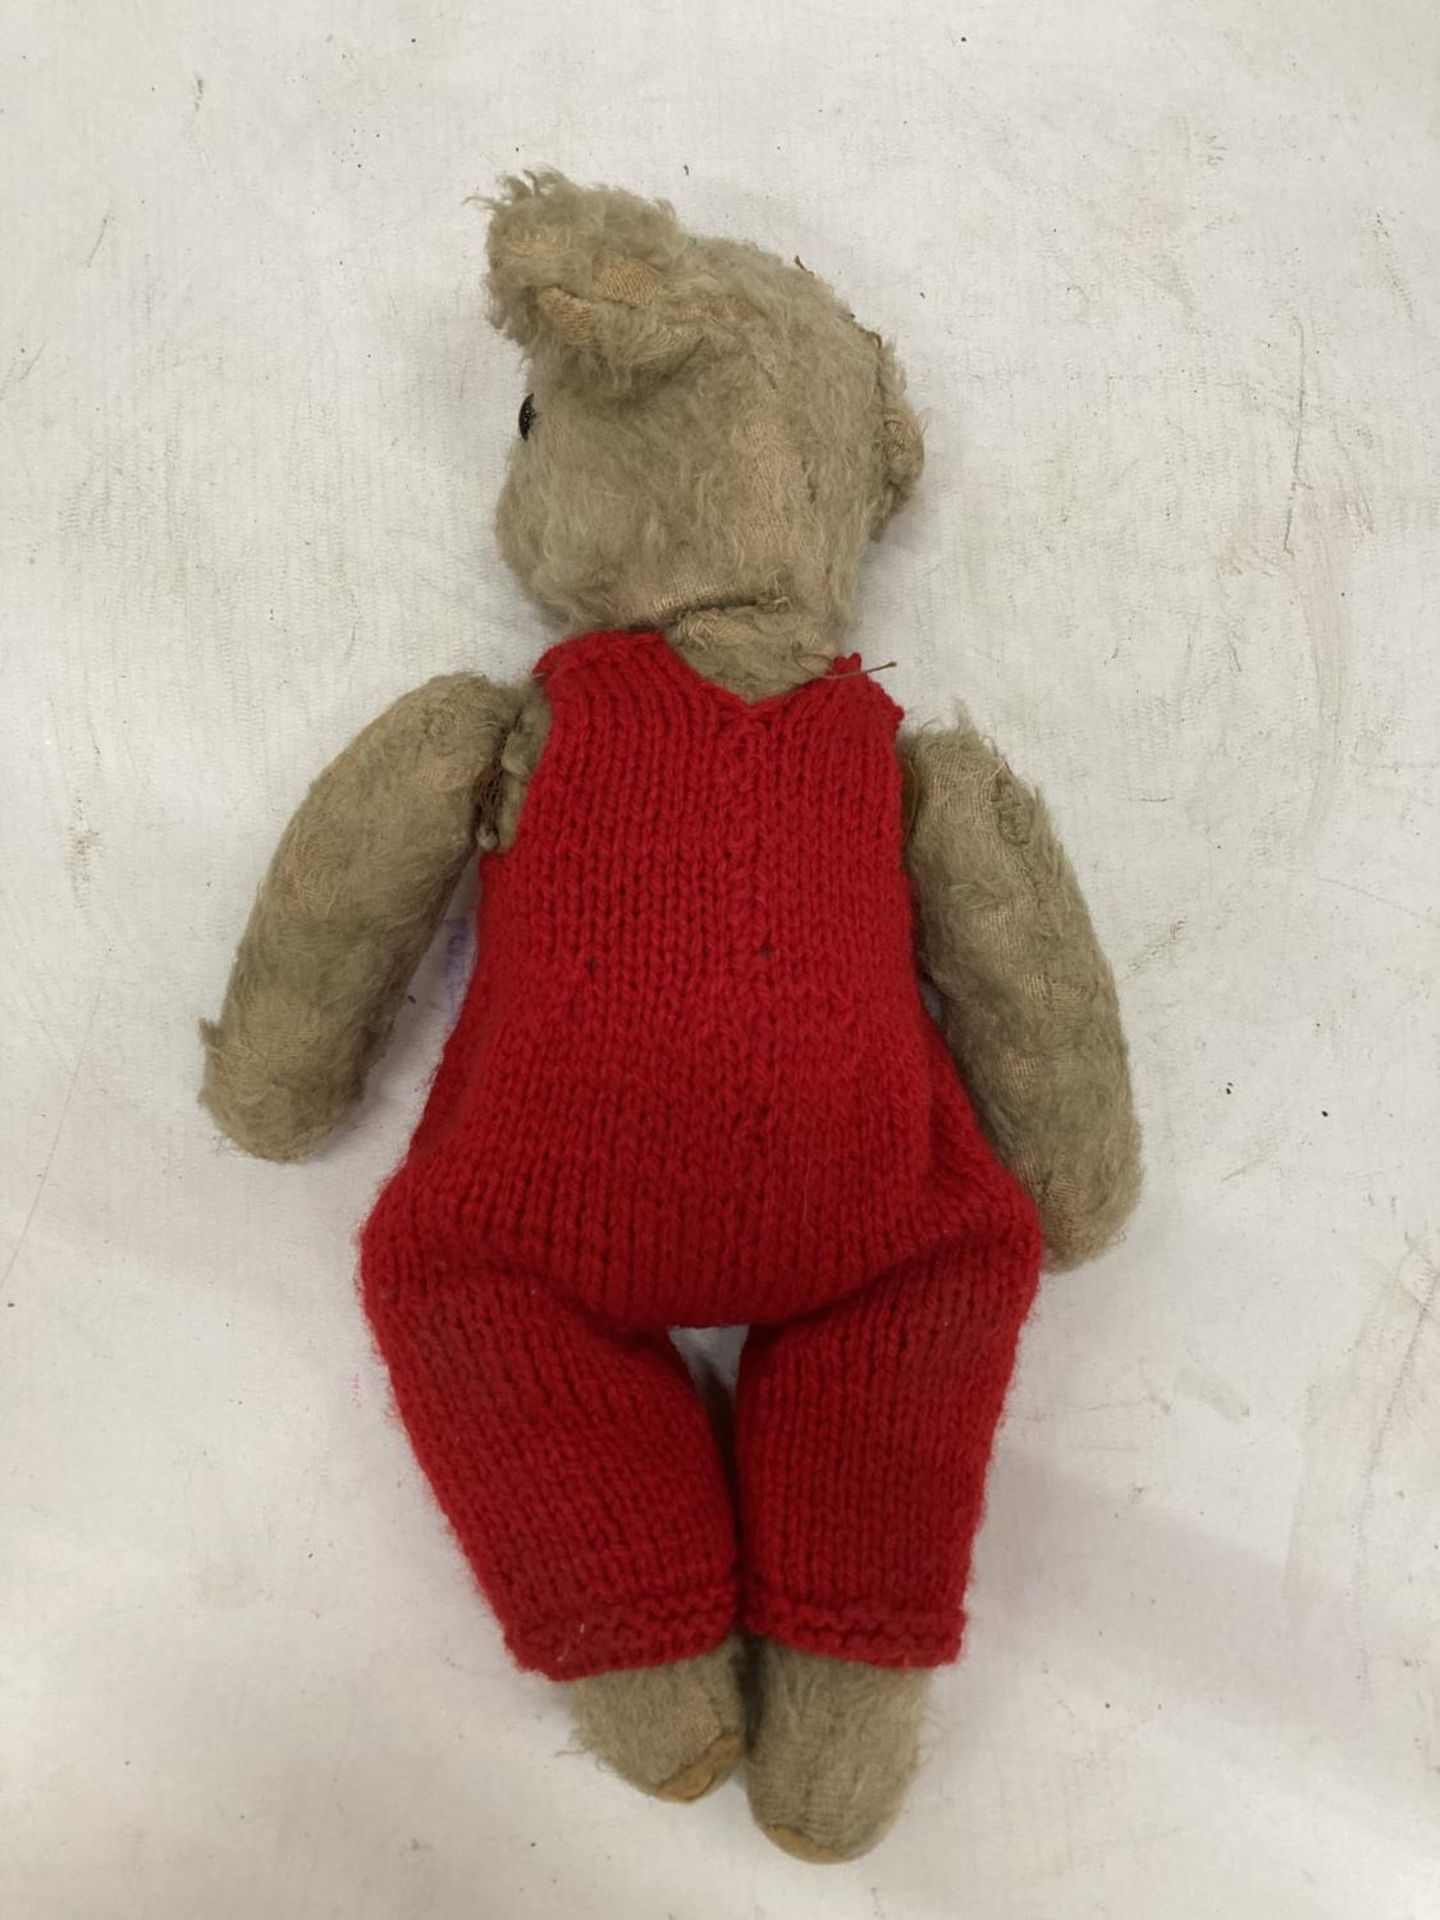 A VINTAGE TEDDY BEAR WITH JOINTED ARMS AND LEGS - Image 3 of 3